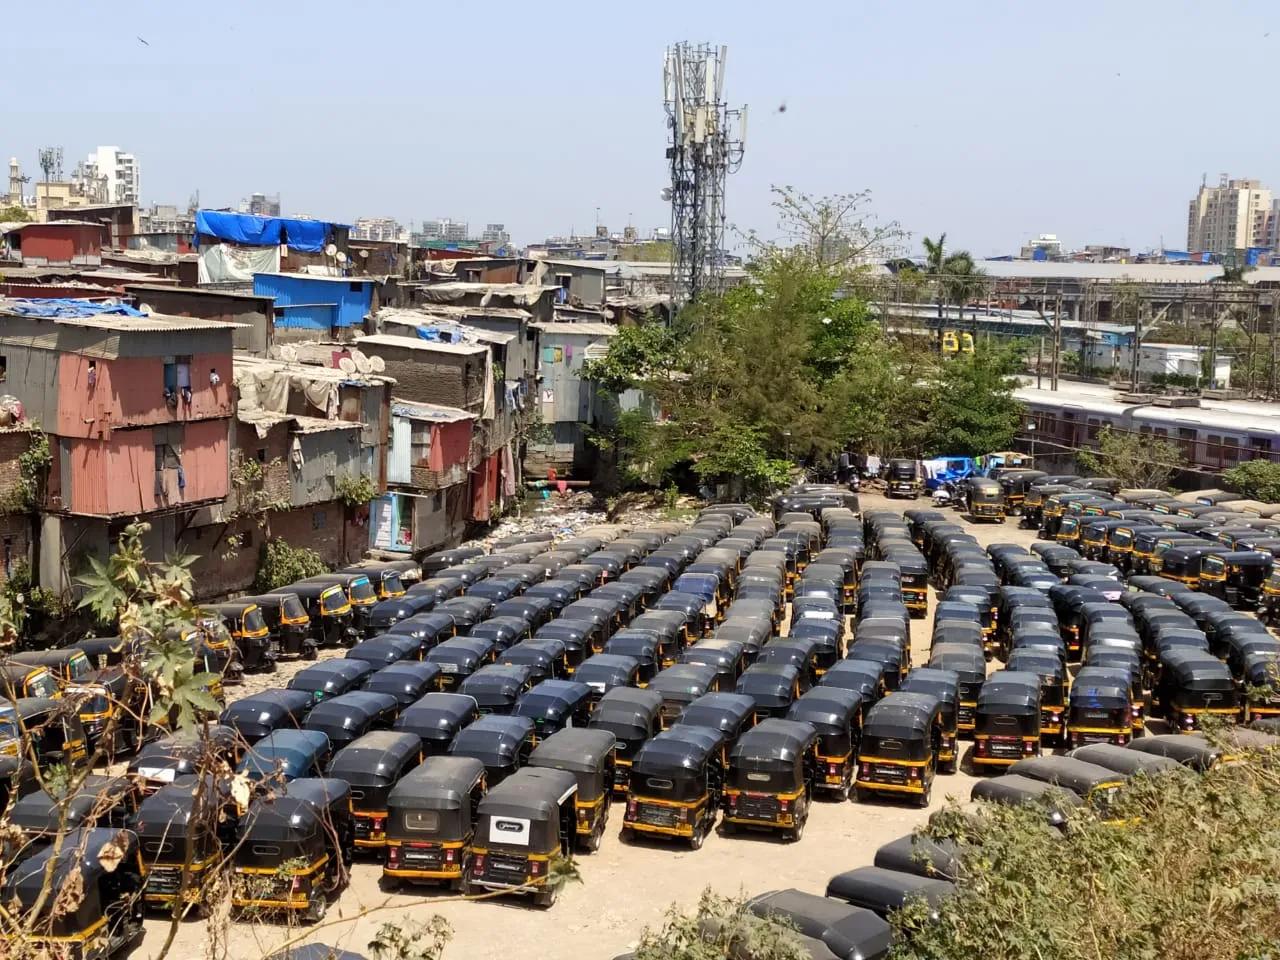 Auto-rickshaws parked in Bandra after Prime Minister Narendra Modi announced Janata Curfew on March 22, 2020 following the outbreak of the novel coronavirus.